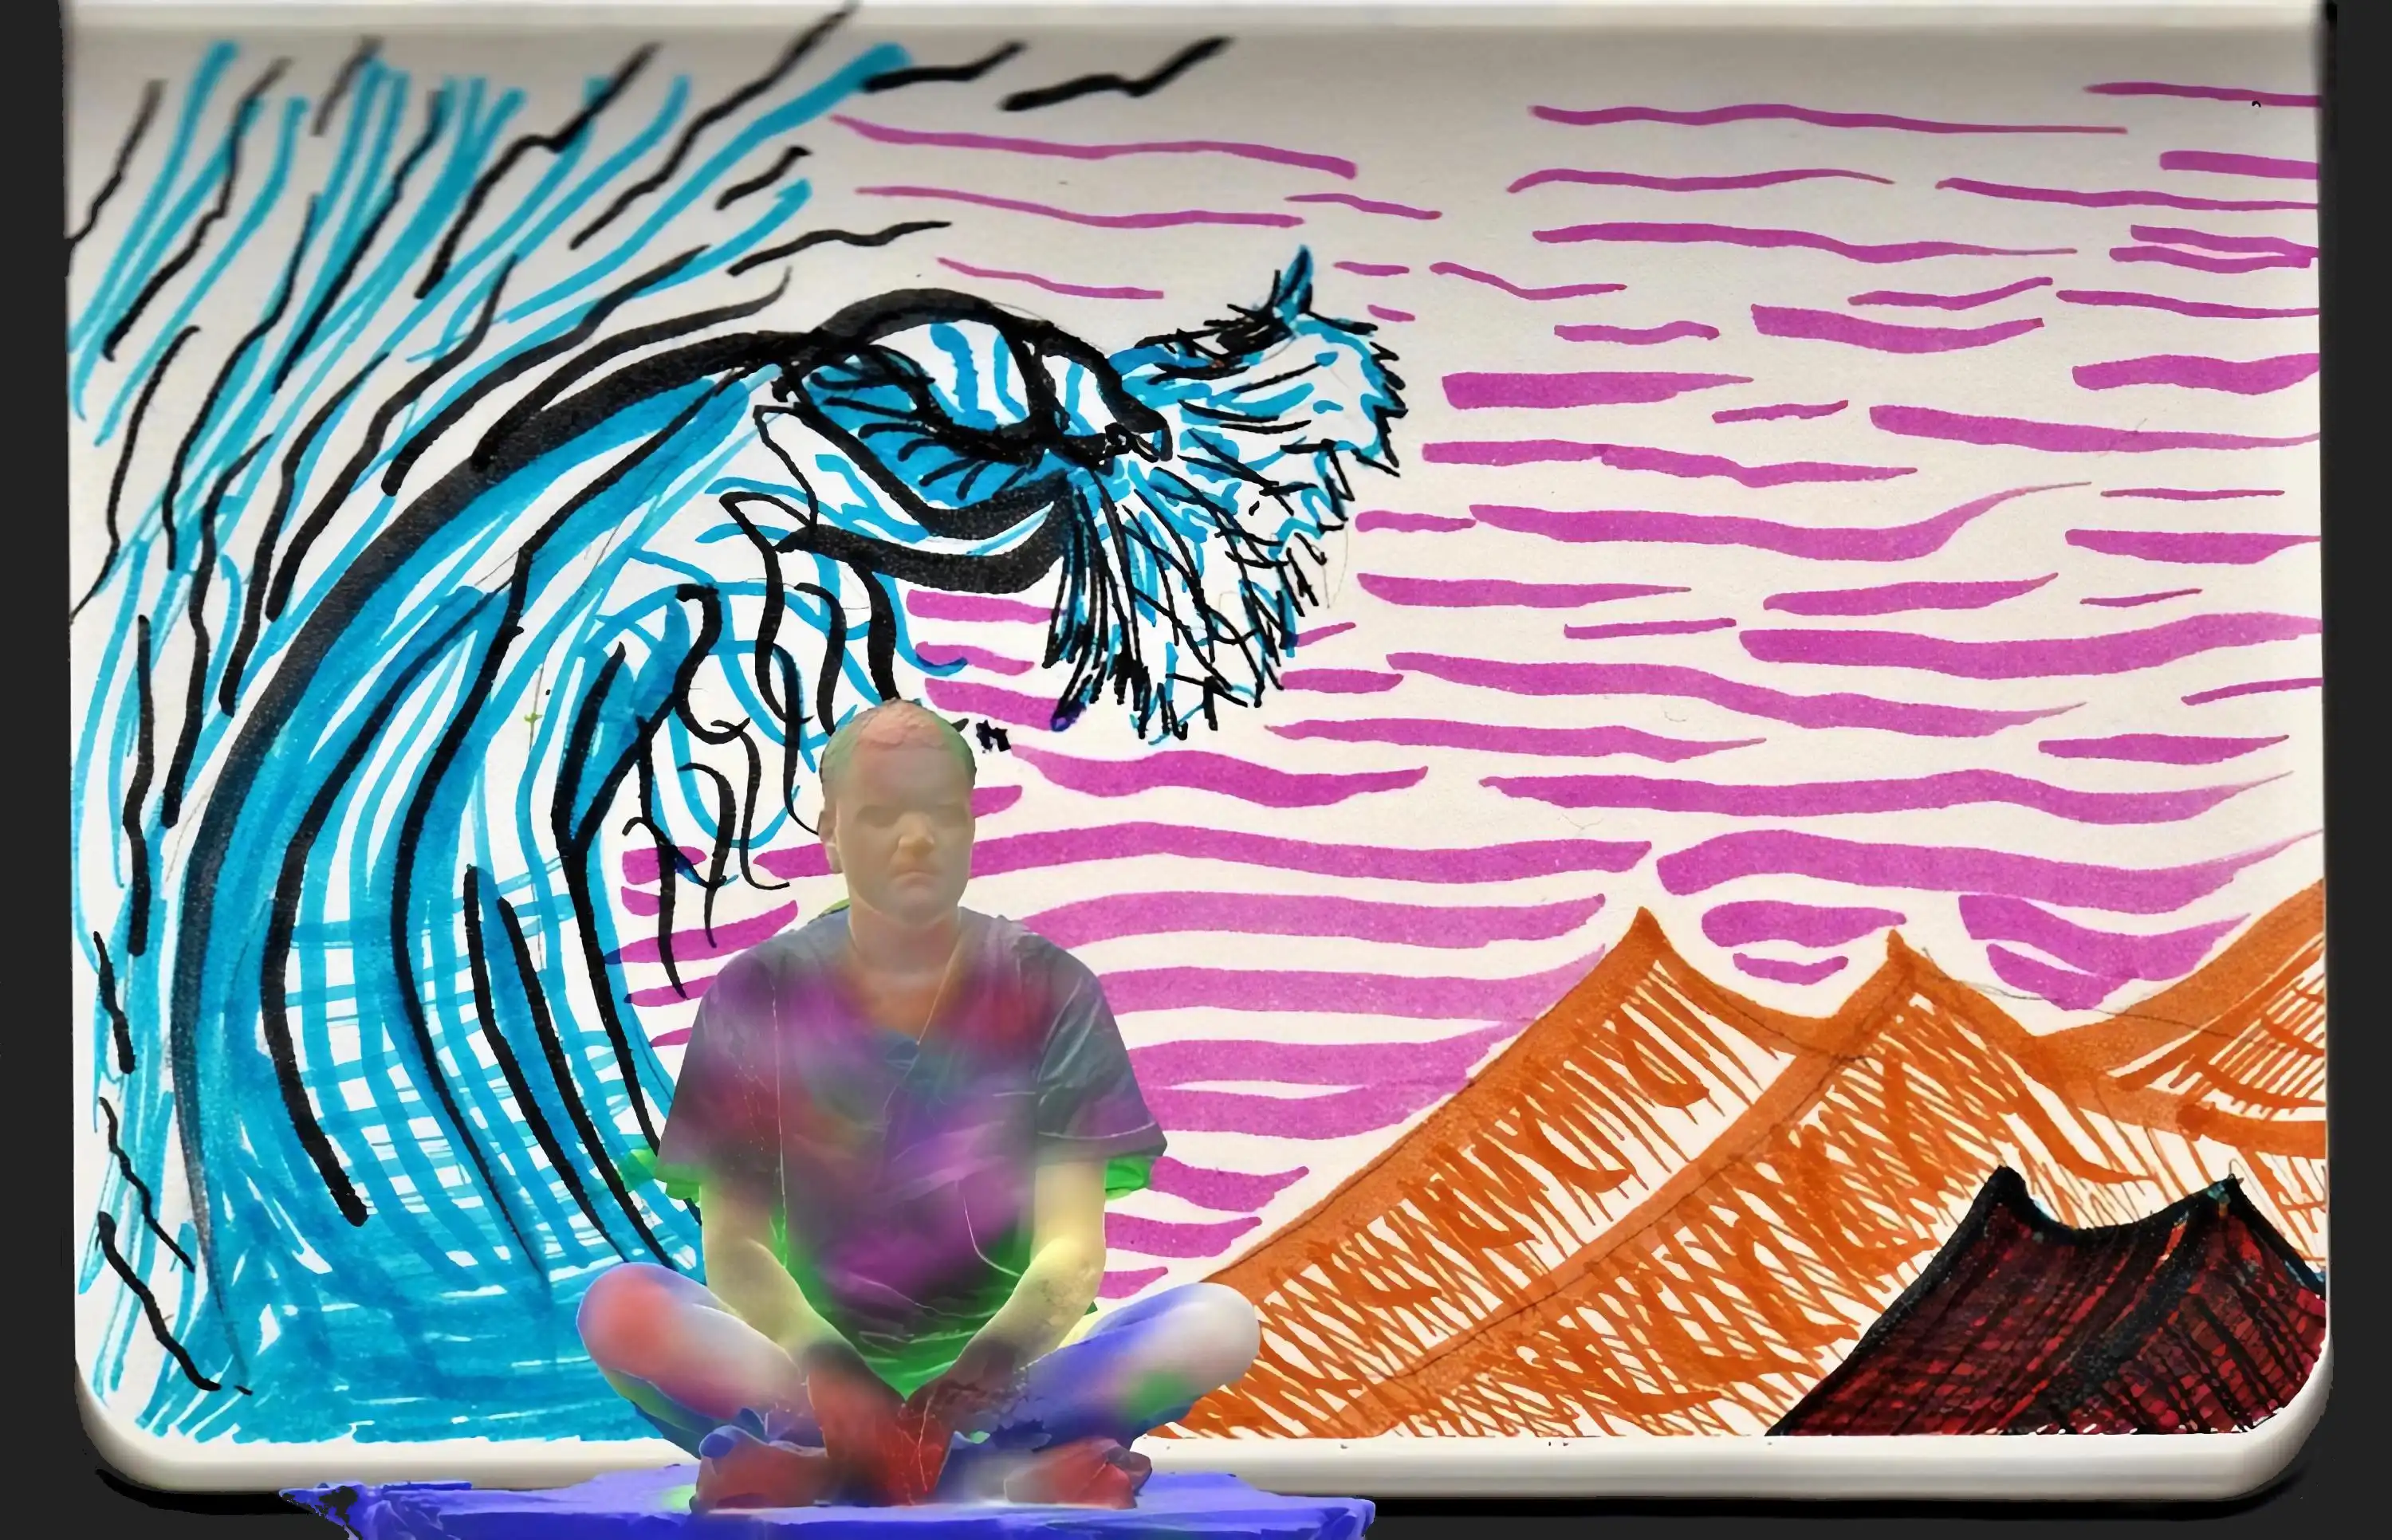 Painted 3D scan meditating in front of a notebook page depicting a tsunami over a desert